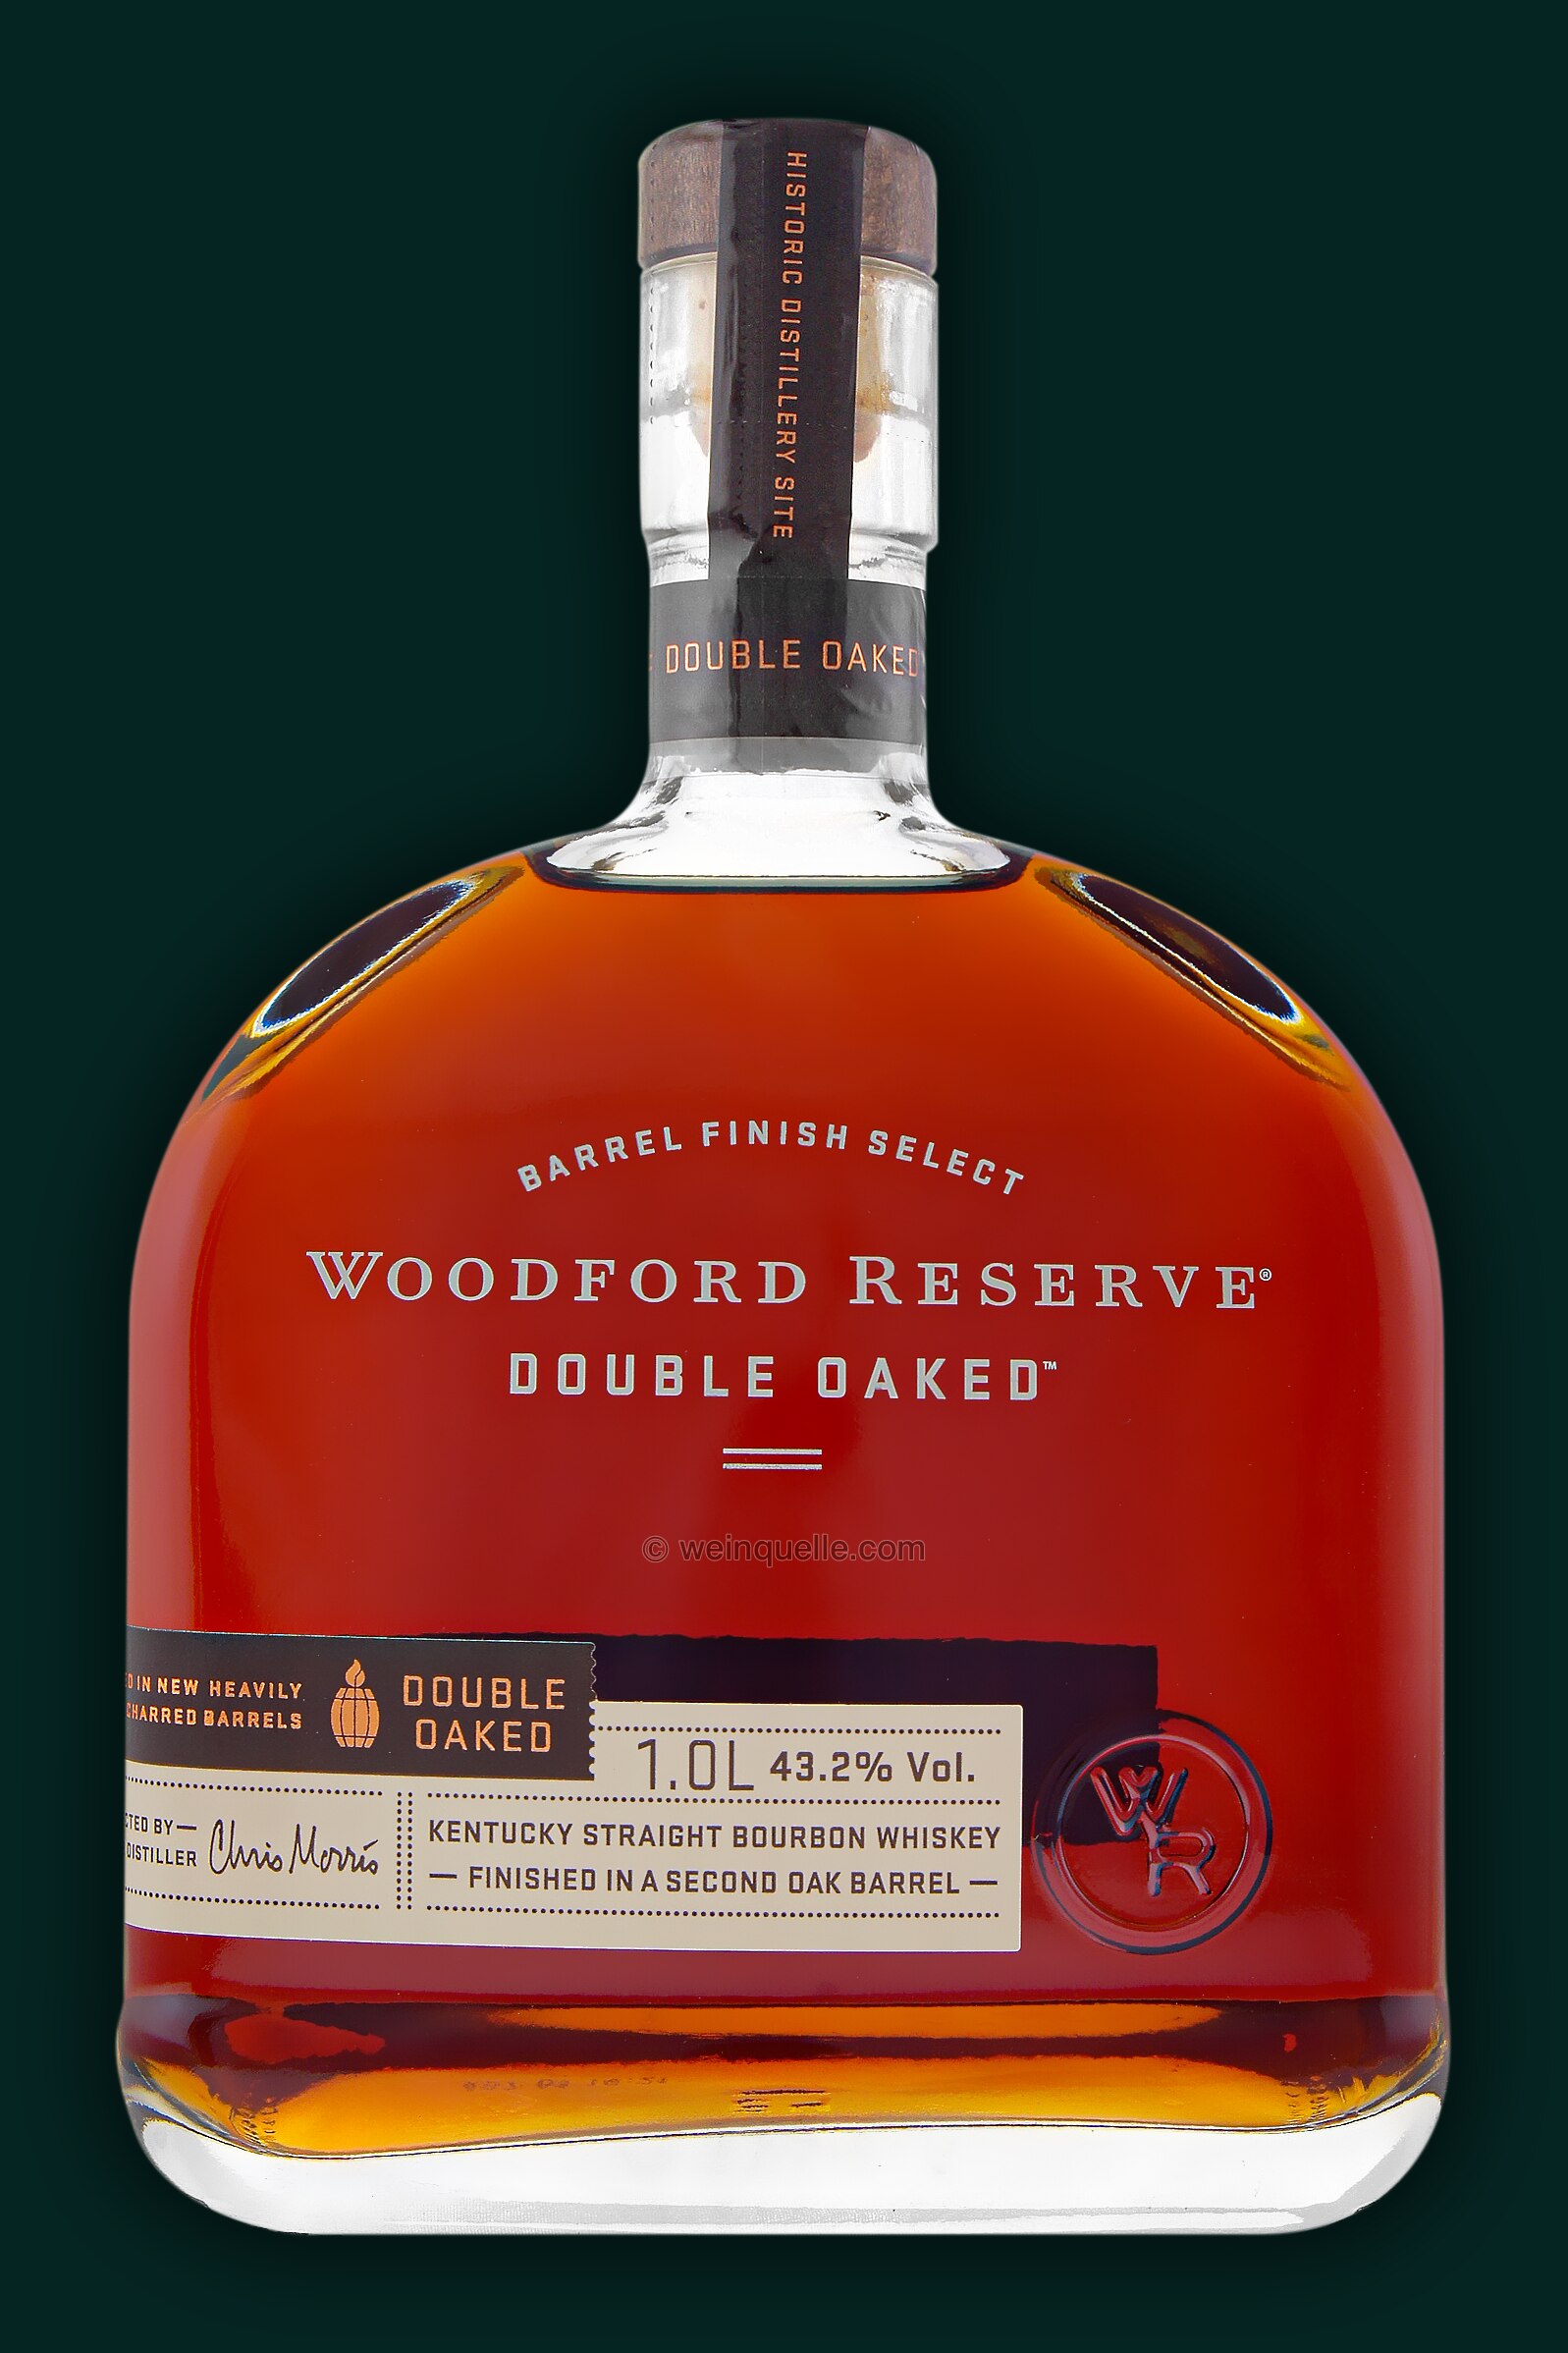 Woodford Double Double Oaked Price - How do you Price a Switches?